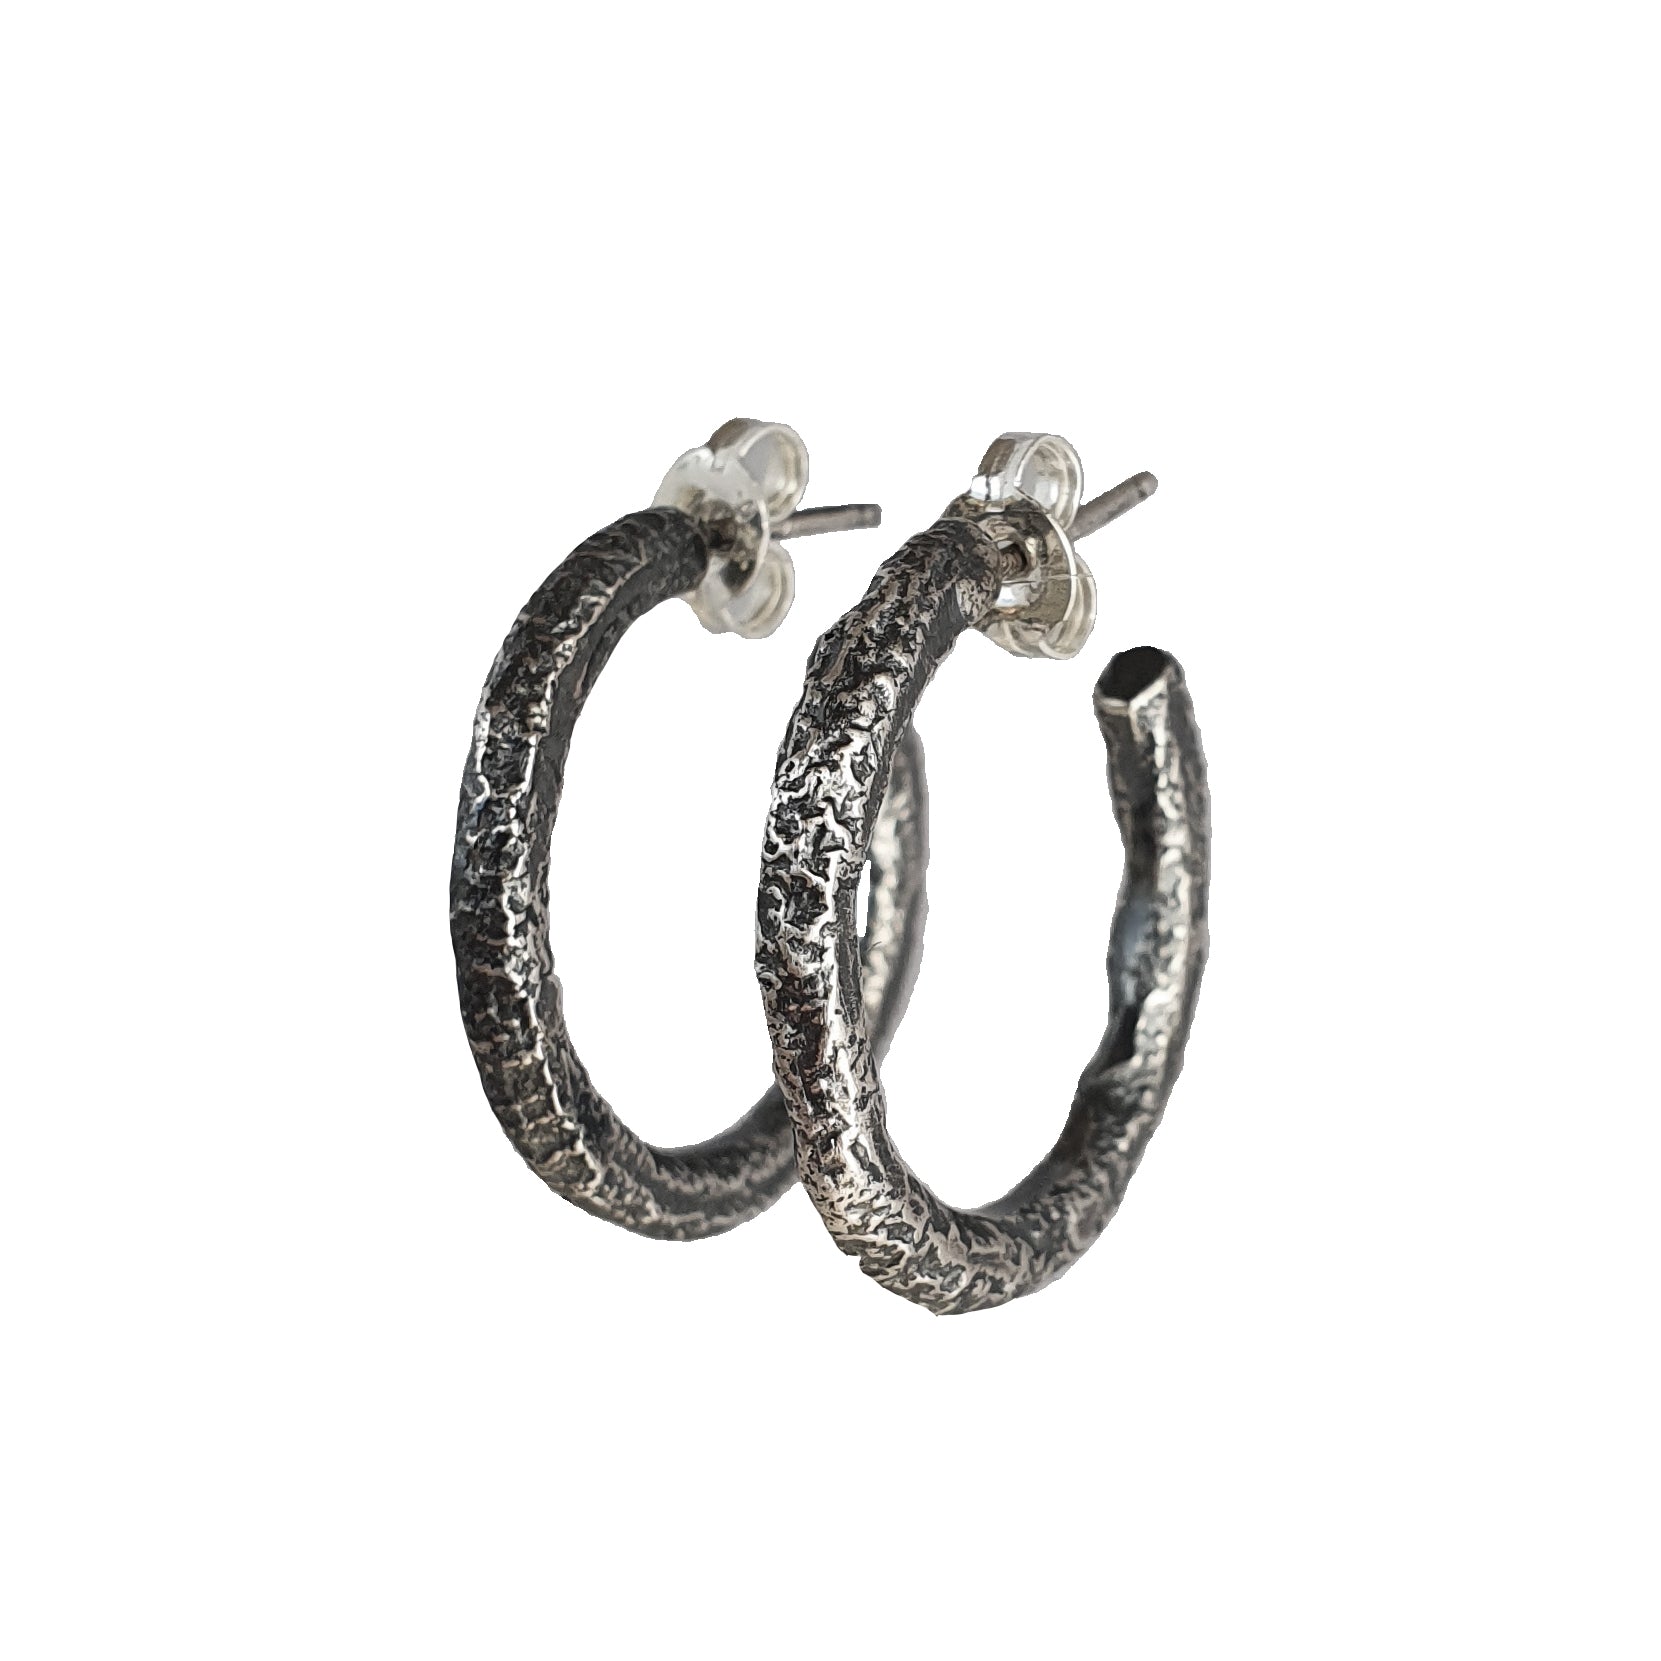 Reticulated Hoops